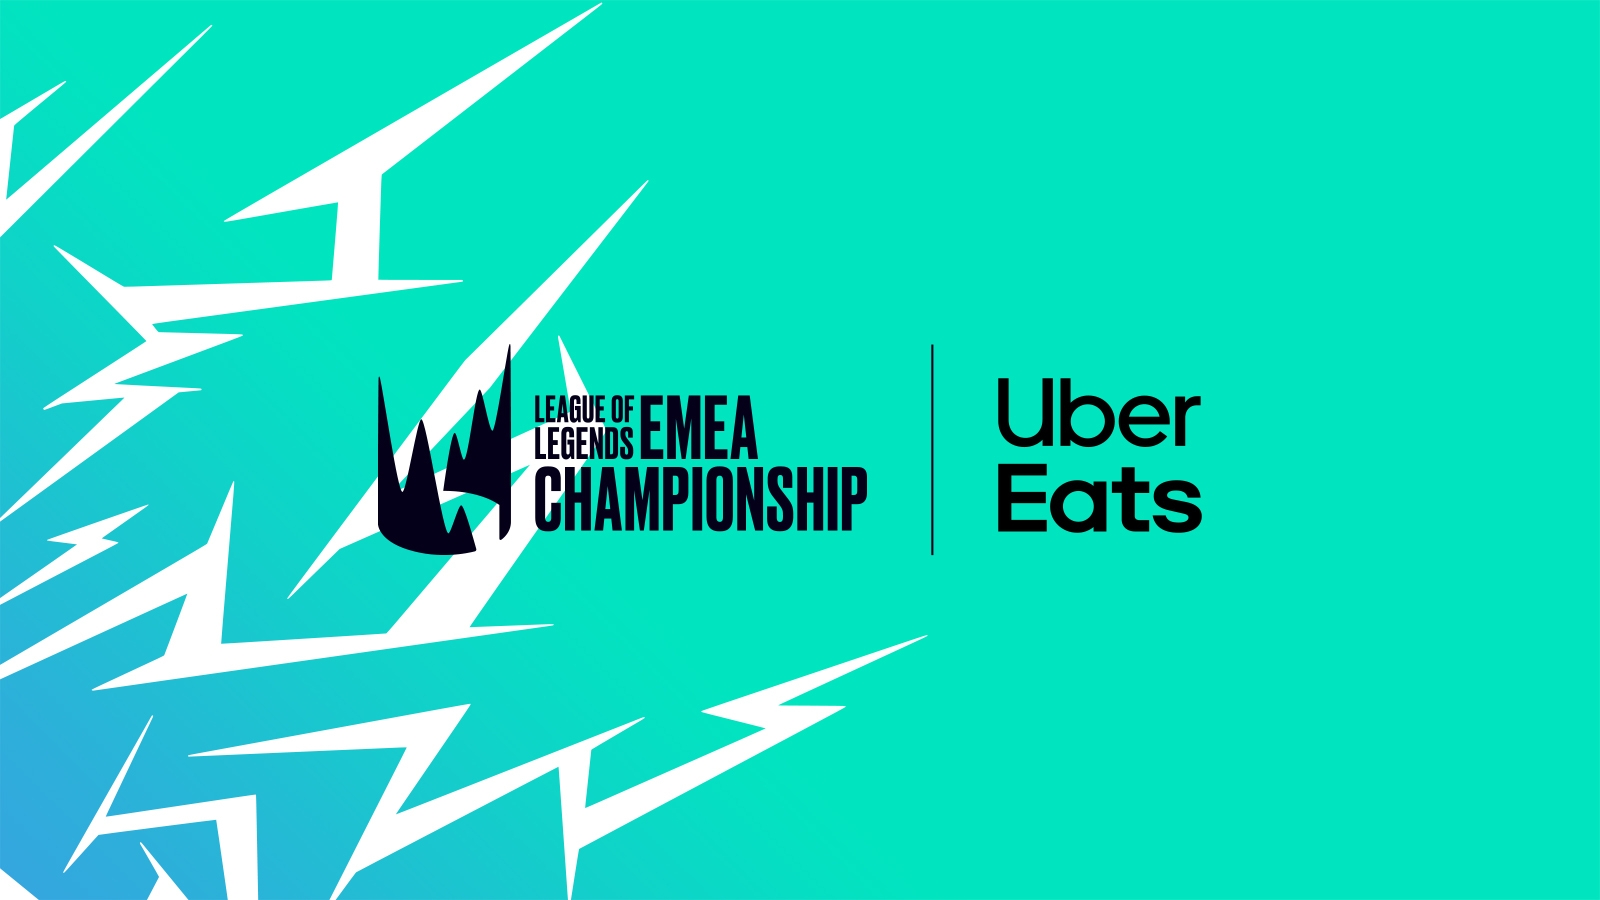 Knock Knock! Uber Eats is here for the LEC!